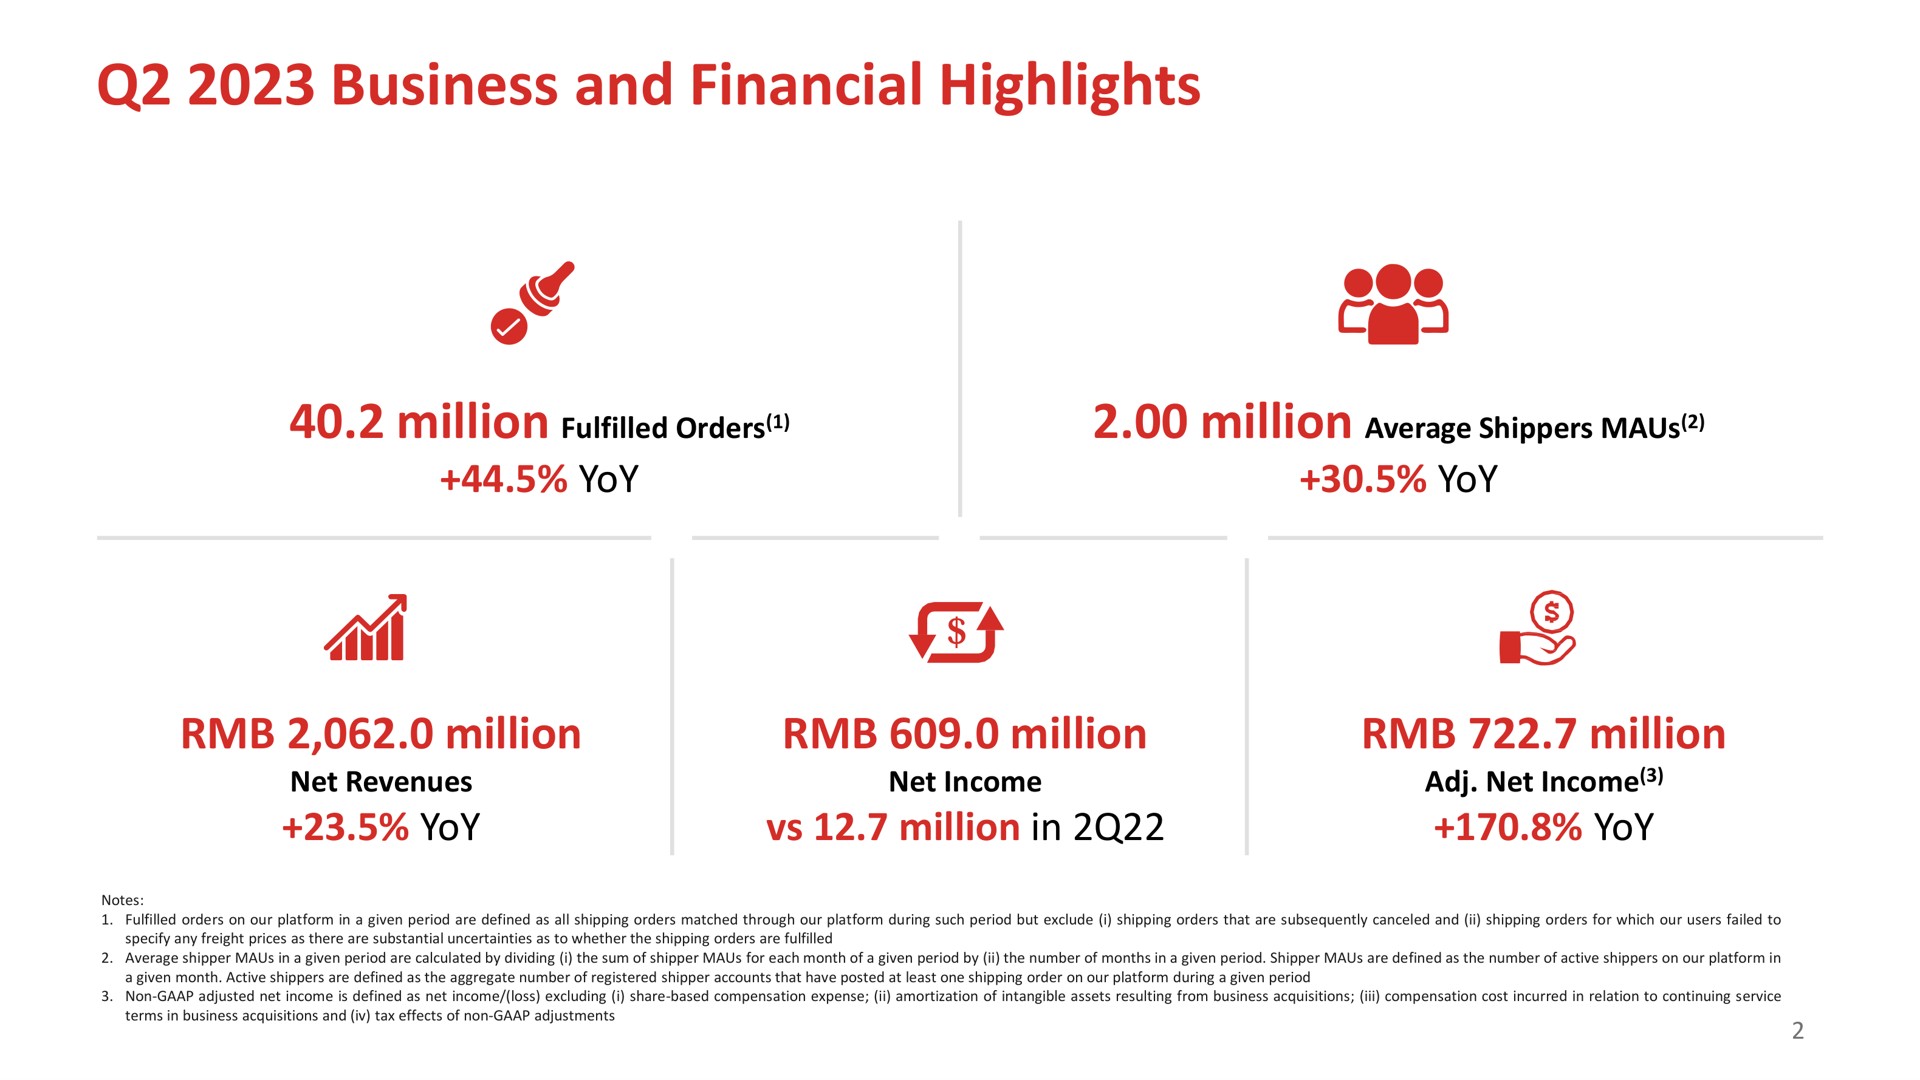 business and financial highlights million million million coo cag ail is | Full Track Alliance